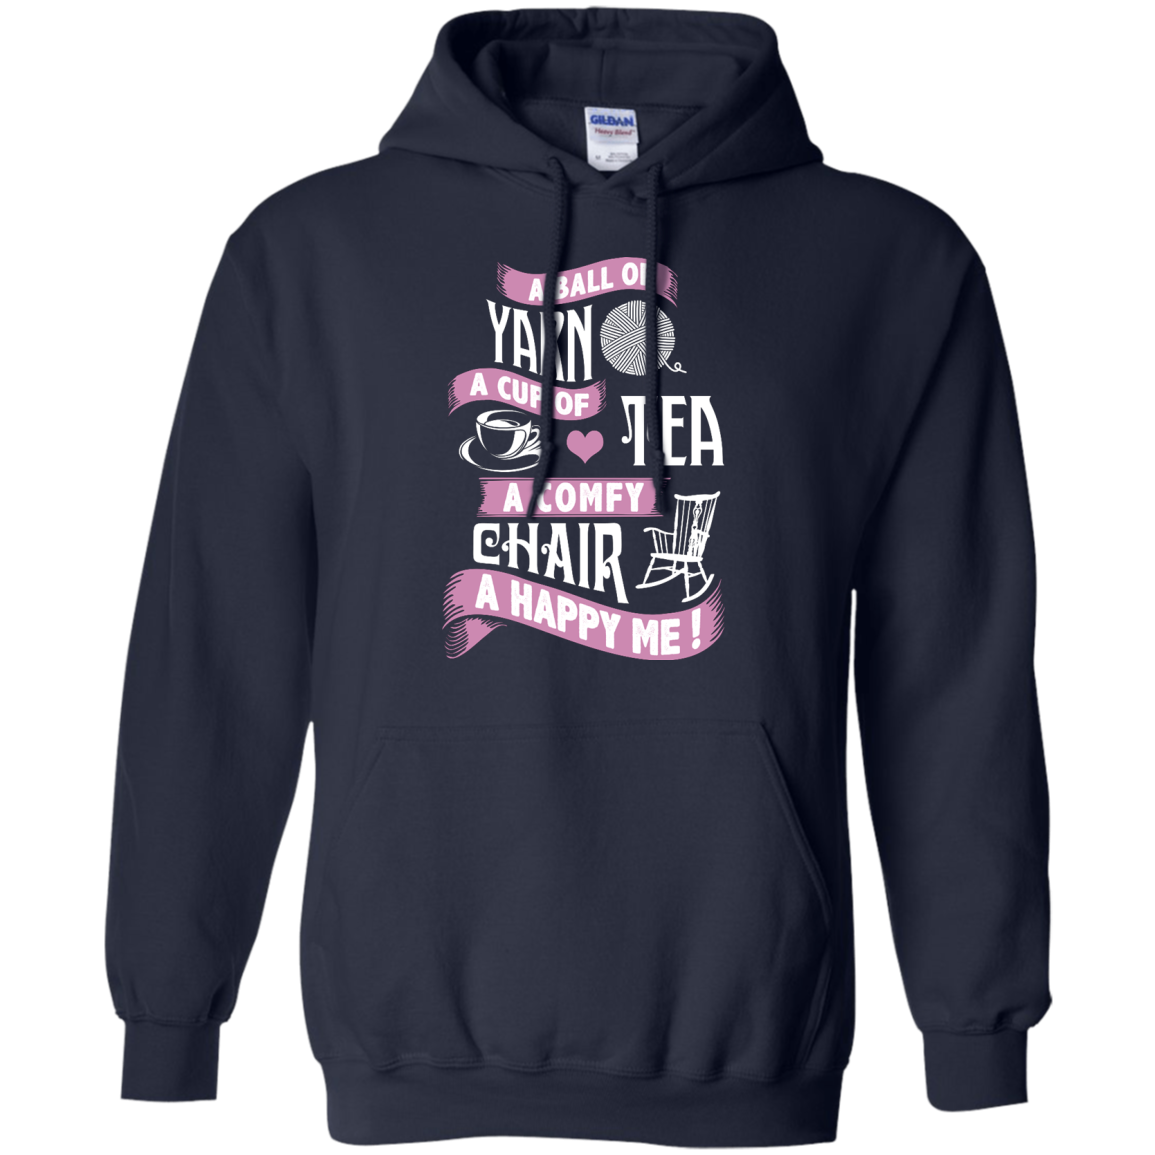 A Ball Of Yarn Pullover Hoodie